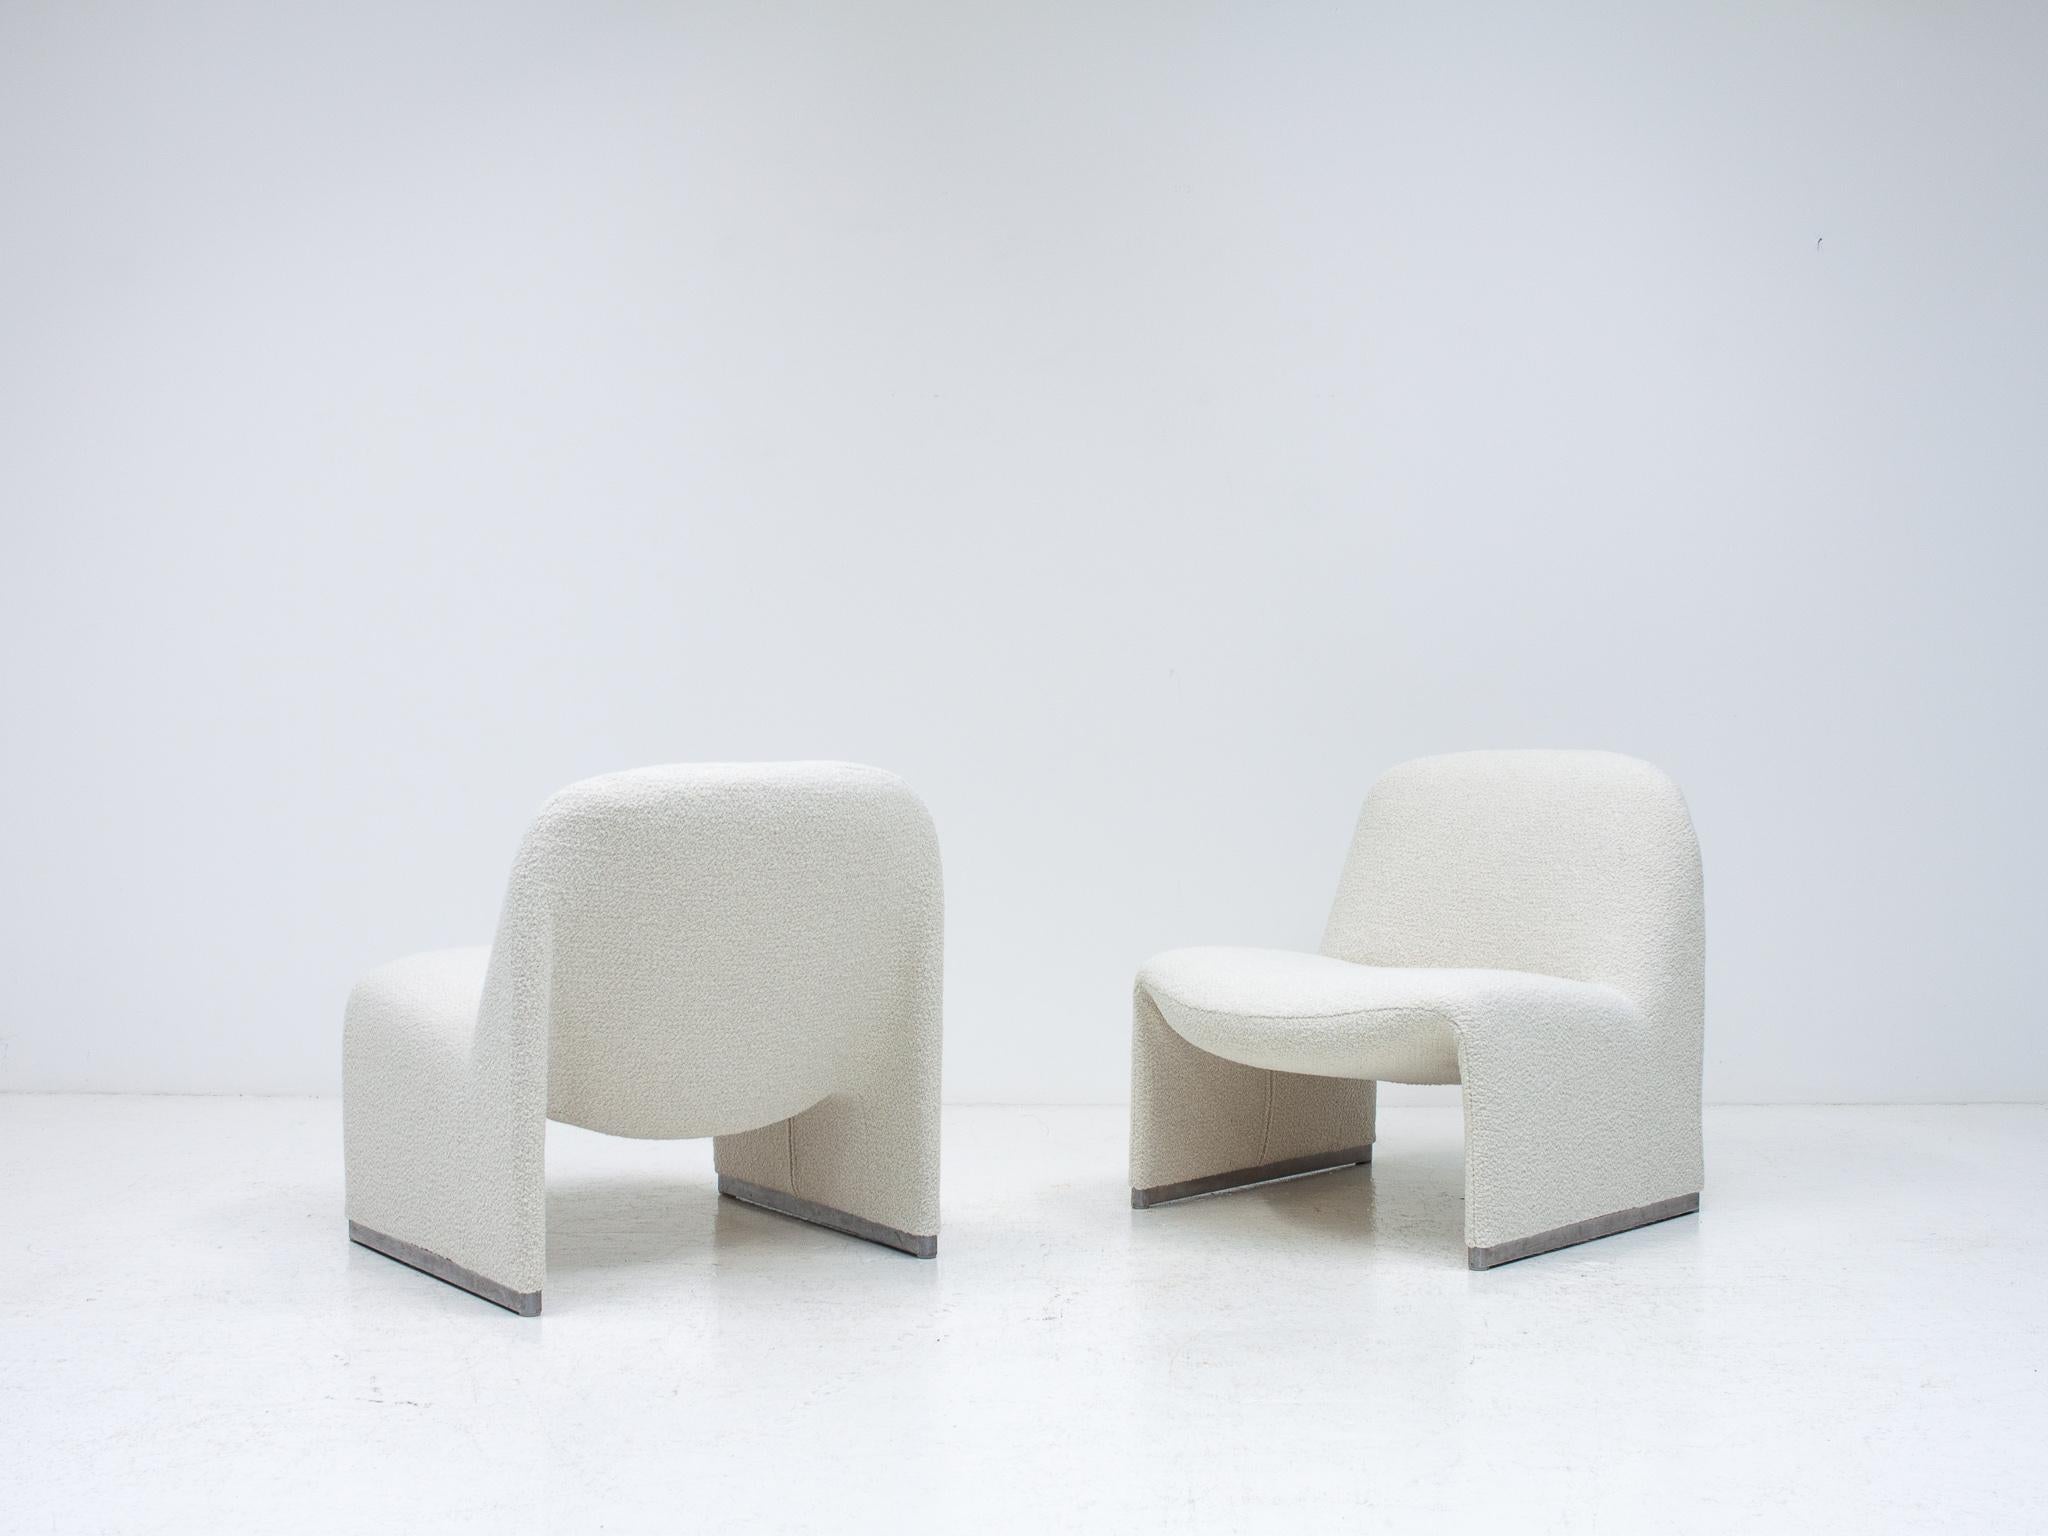 Giancarlo Piretti “Alky” Chairs In Yarn Collective bouclé *Customizable* For Sale 5